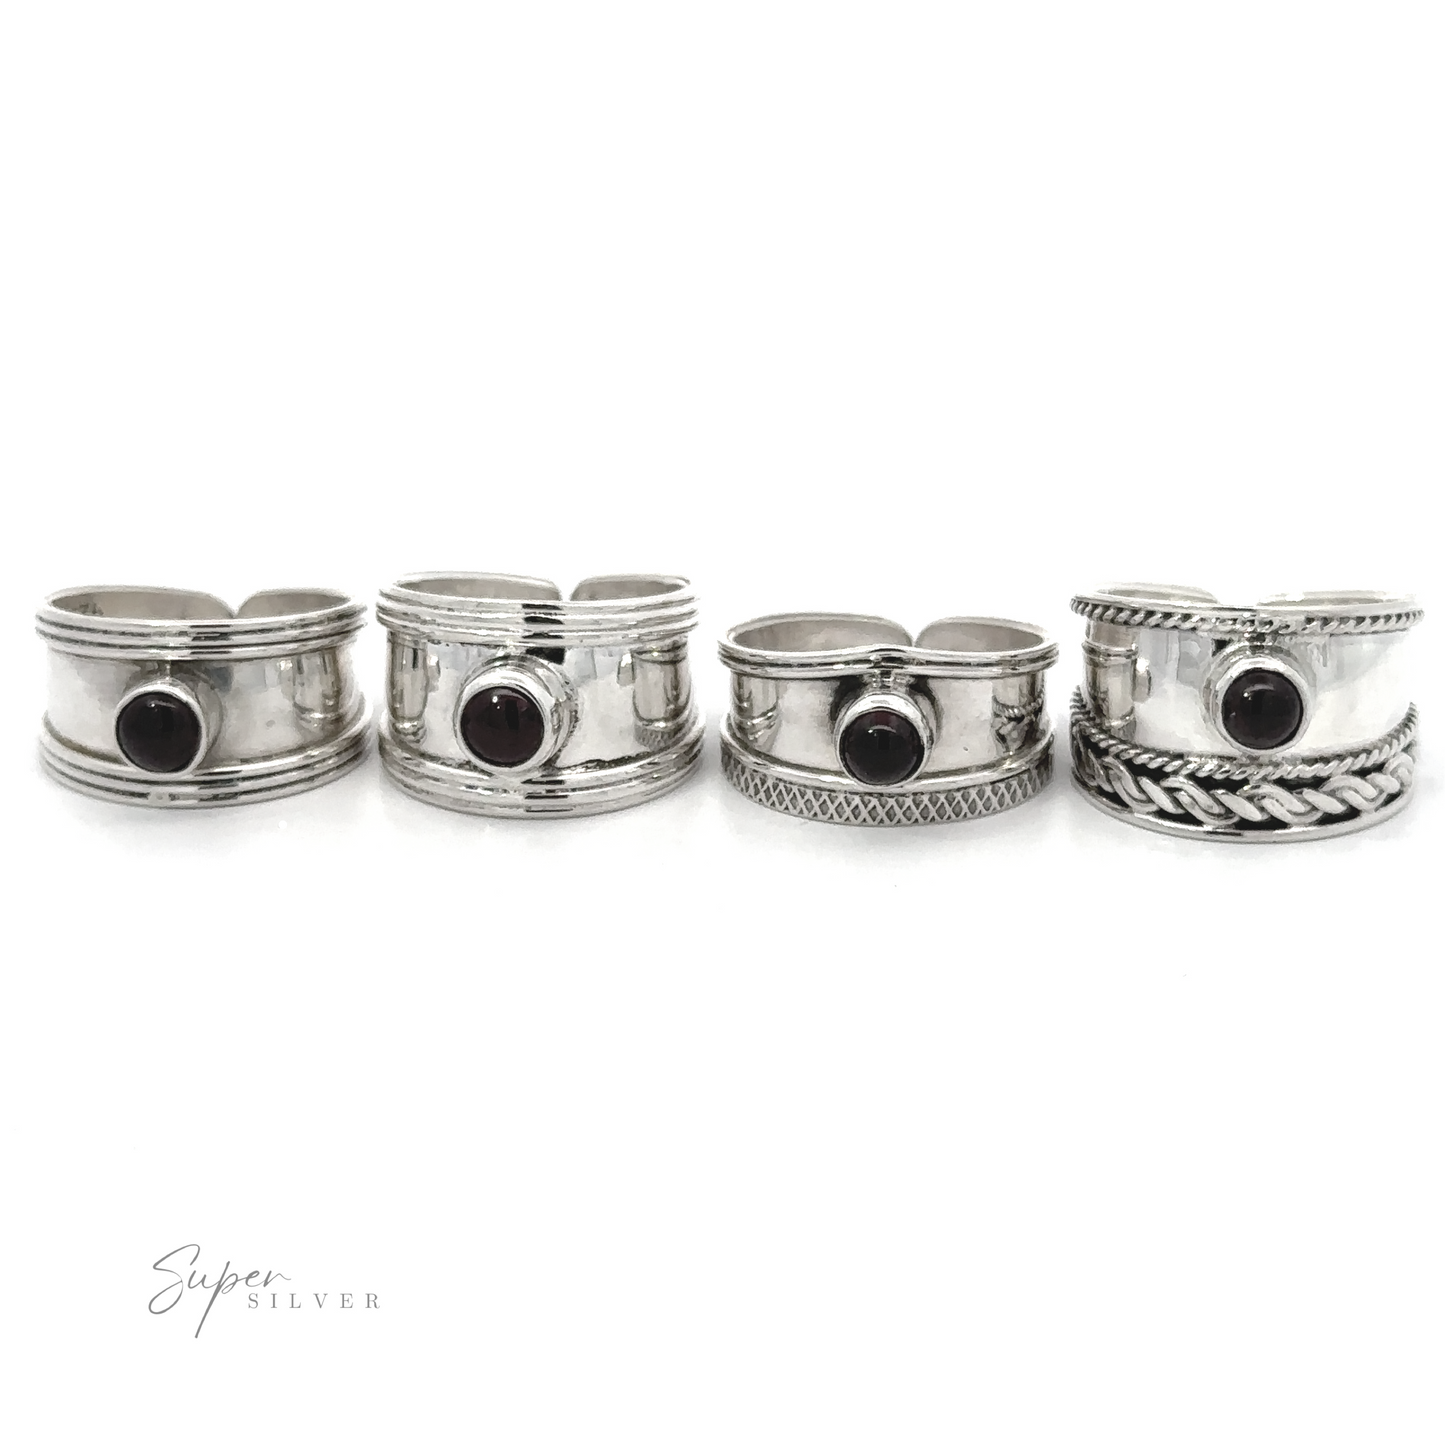 Four Adjustable Wide Cigar Band Toe Rings with Gemstones, each with unique Bohemian designs, displayed on a plain white background.